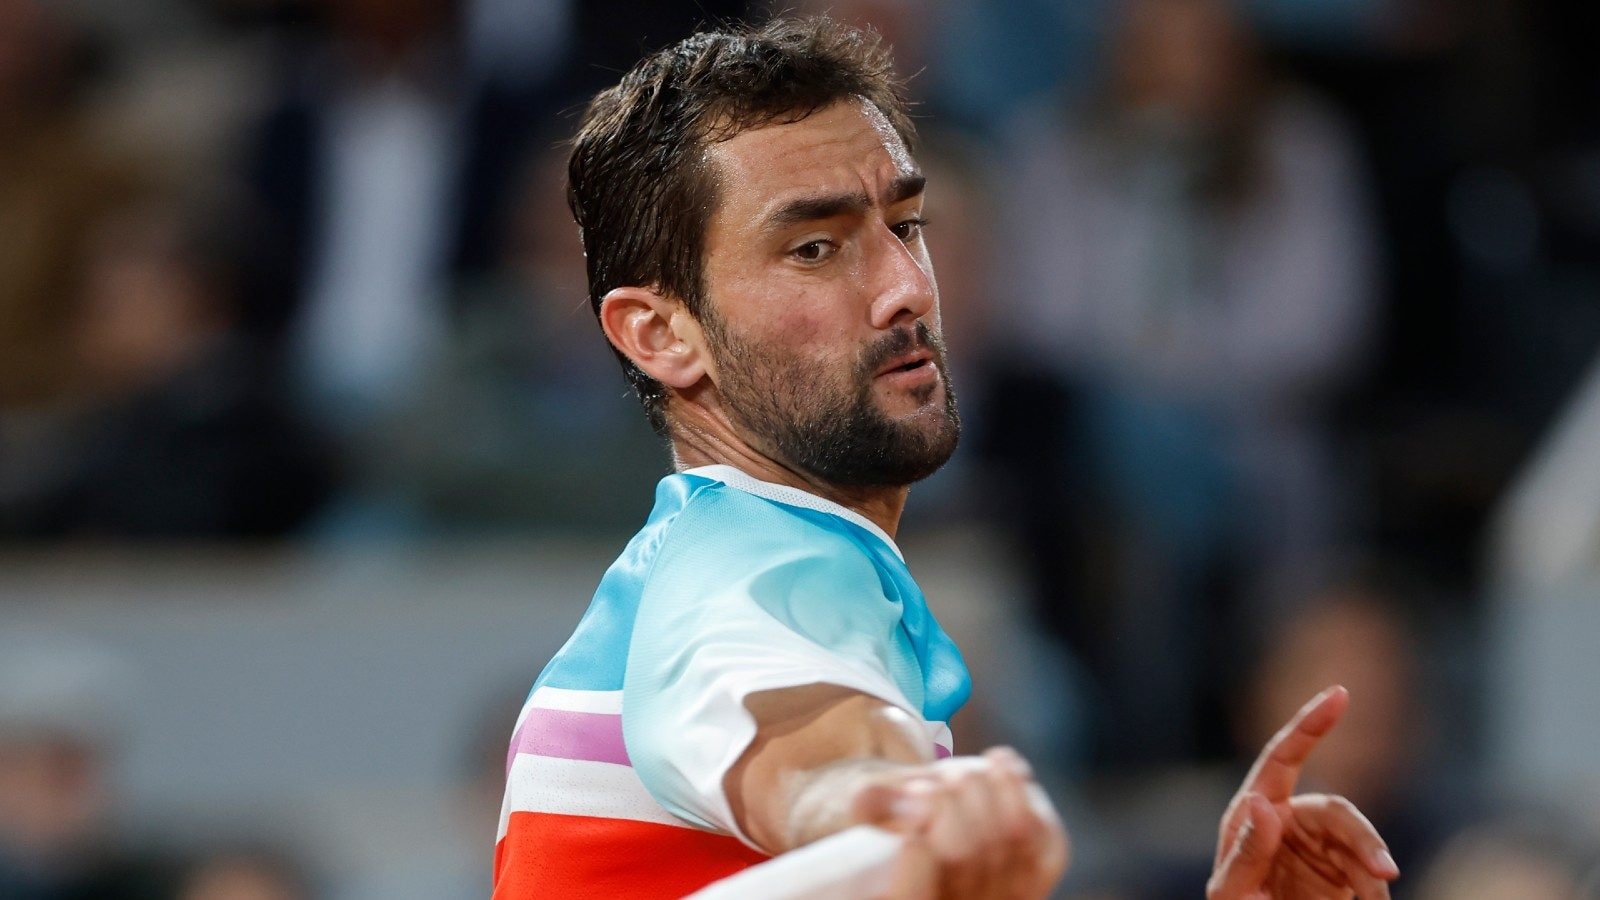 French Open 2022 Marin Cilic Downs Russian Second Seed Daniil Medvedev to Set Up Rublev Clash